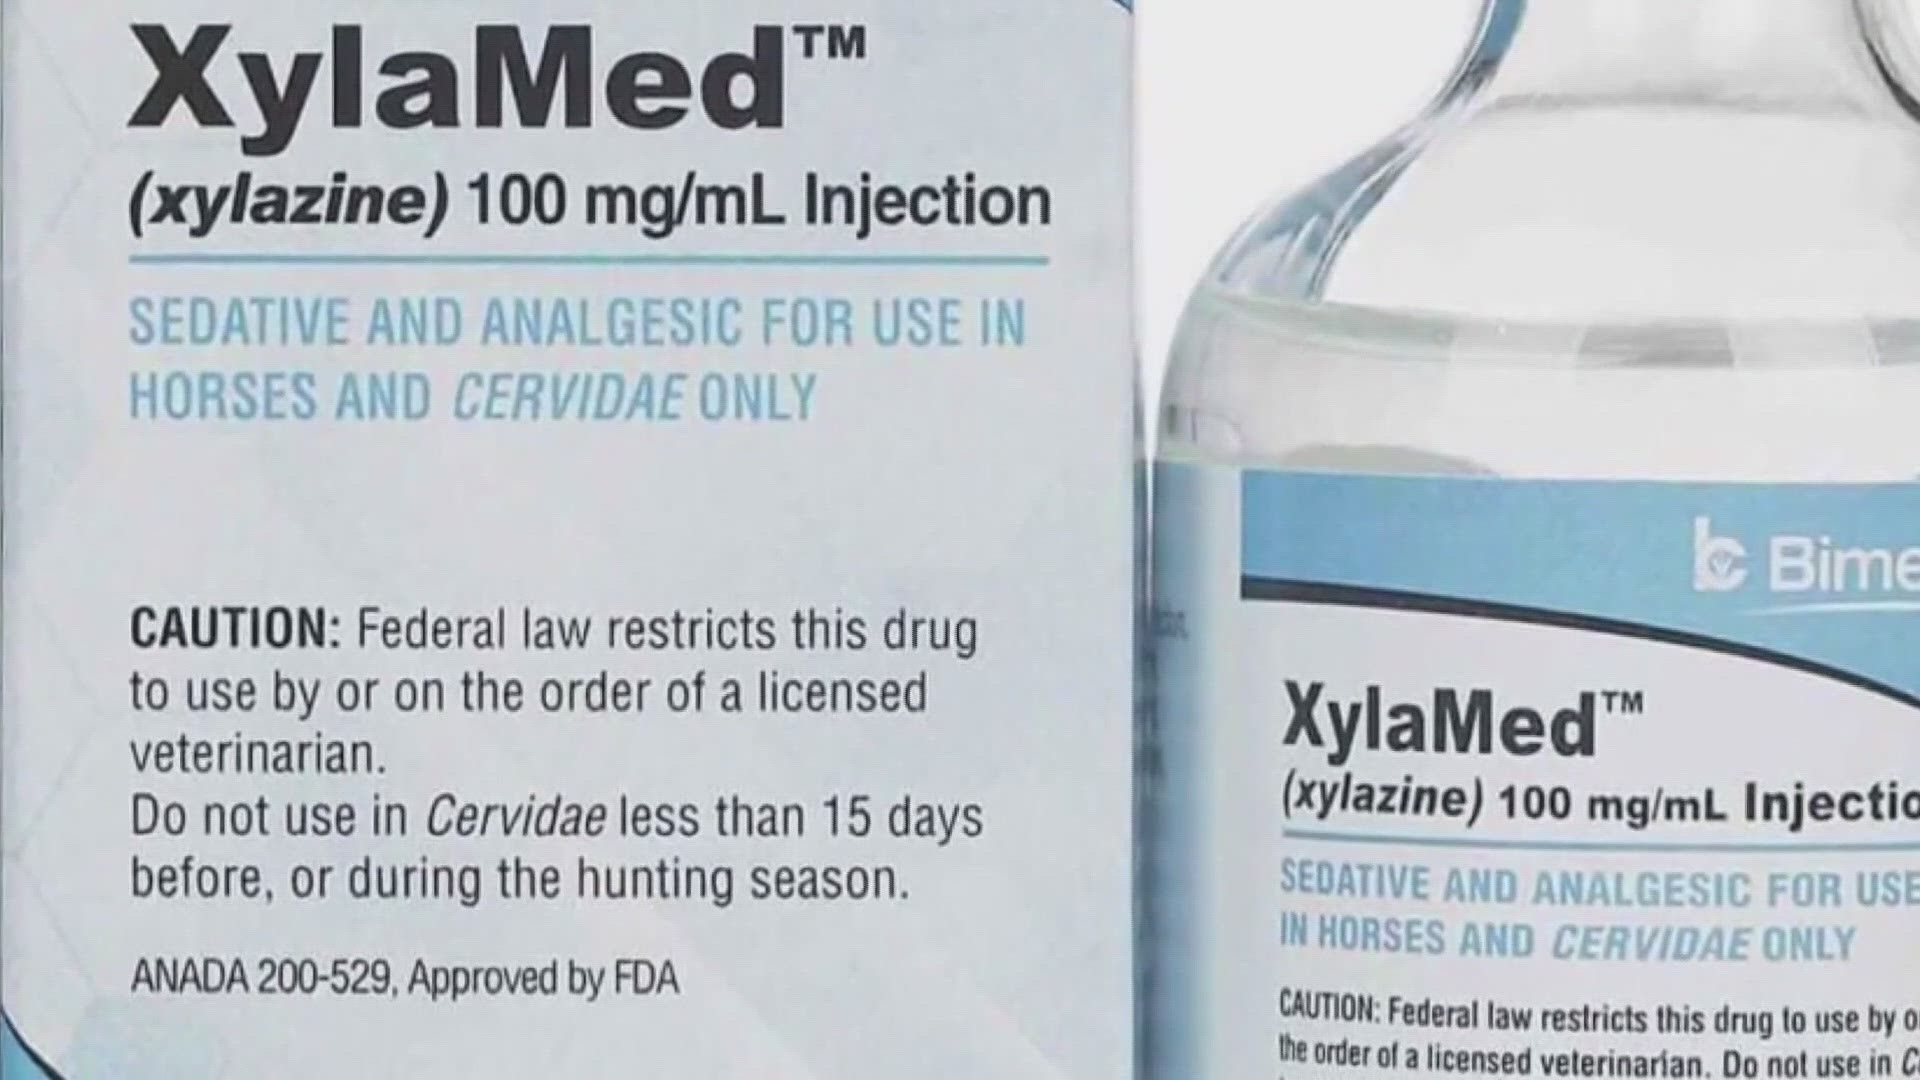 For the last several years, the Columbus Police Crime Laboratory has encountered xylazine mixed with fentanyl or fentanyl-related substances.